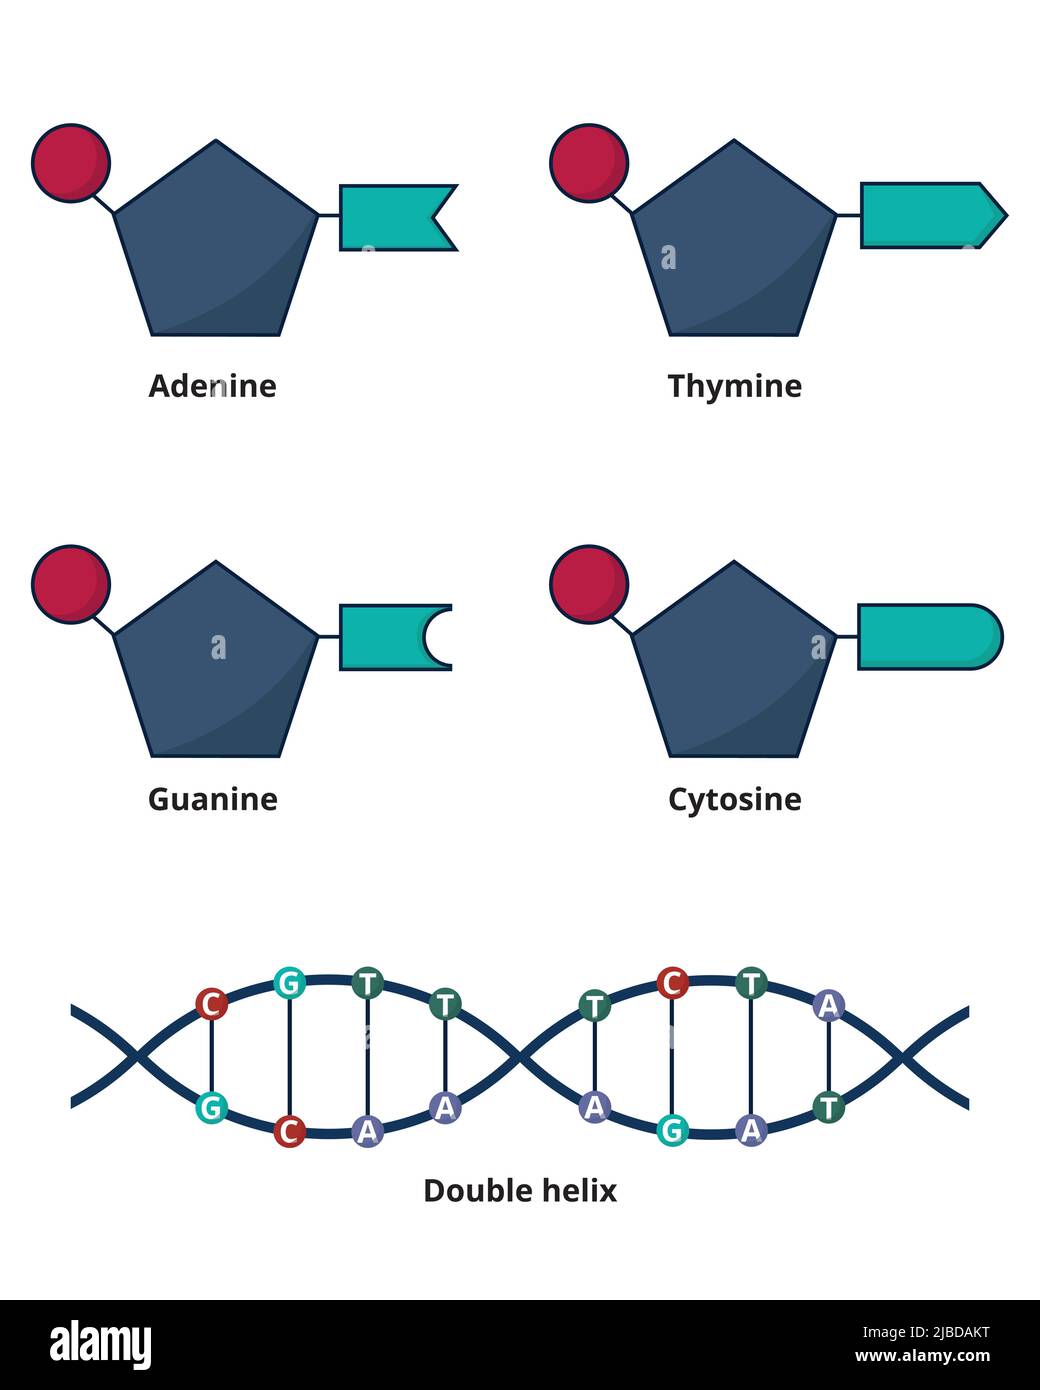 General concept of DNA structure. DNA nucleotids as bases: adenine, cytosine, guanine and thymine. Stock Vector